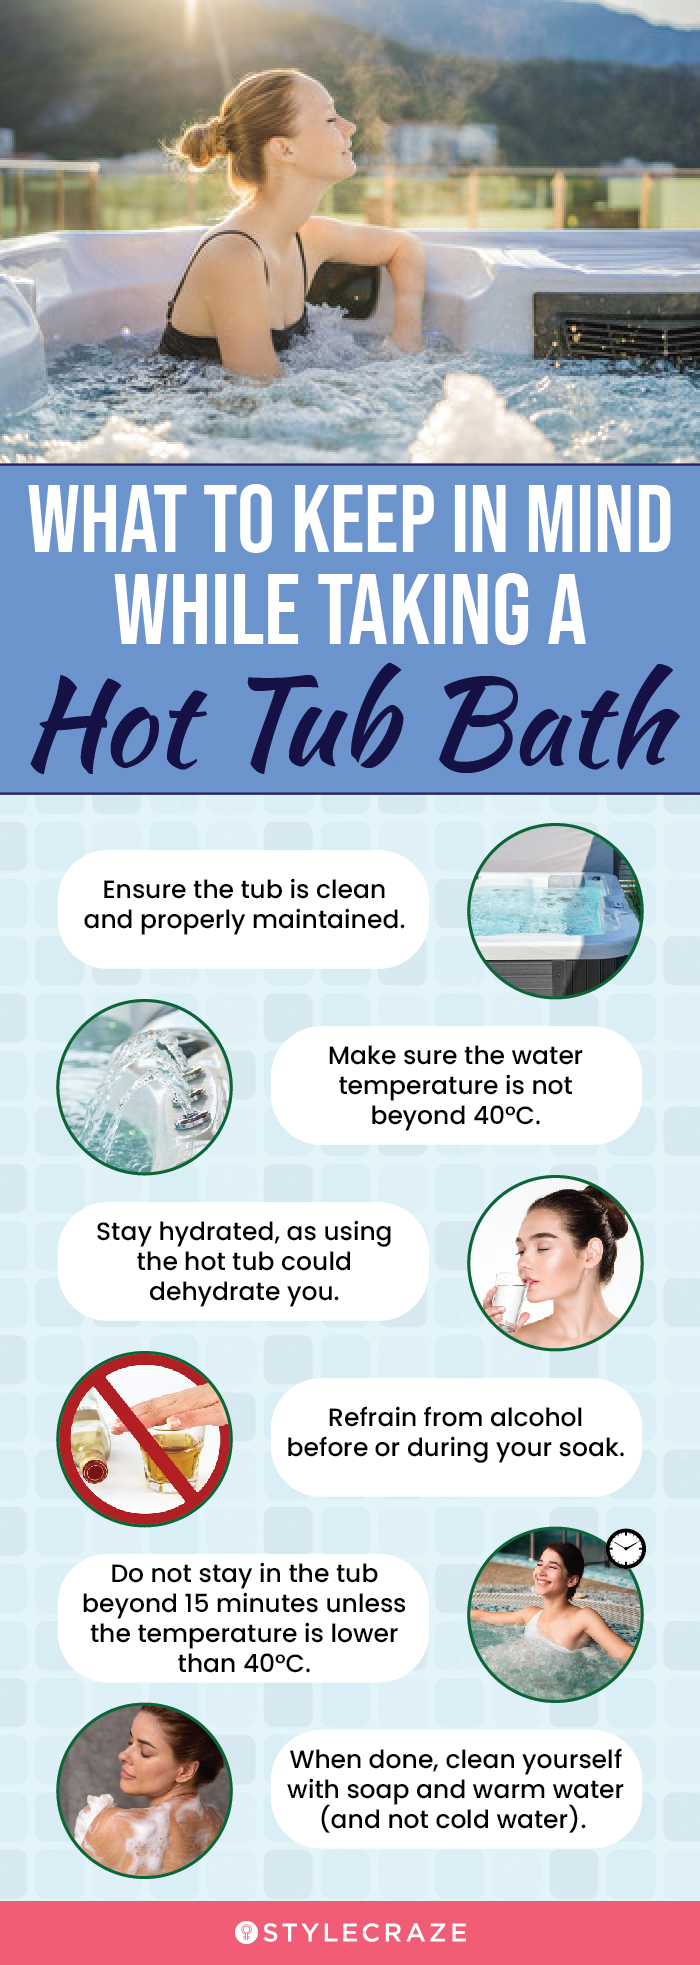 what to keep in mind while taking a hot tub bath (infographic)